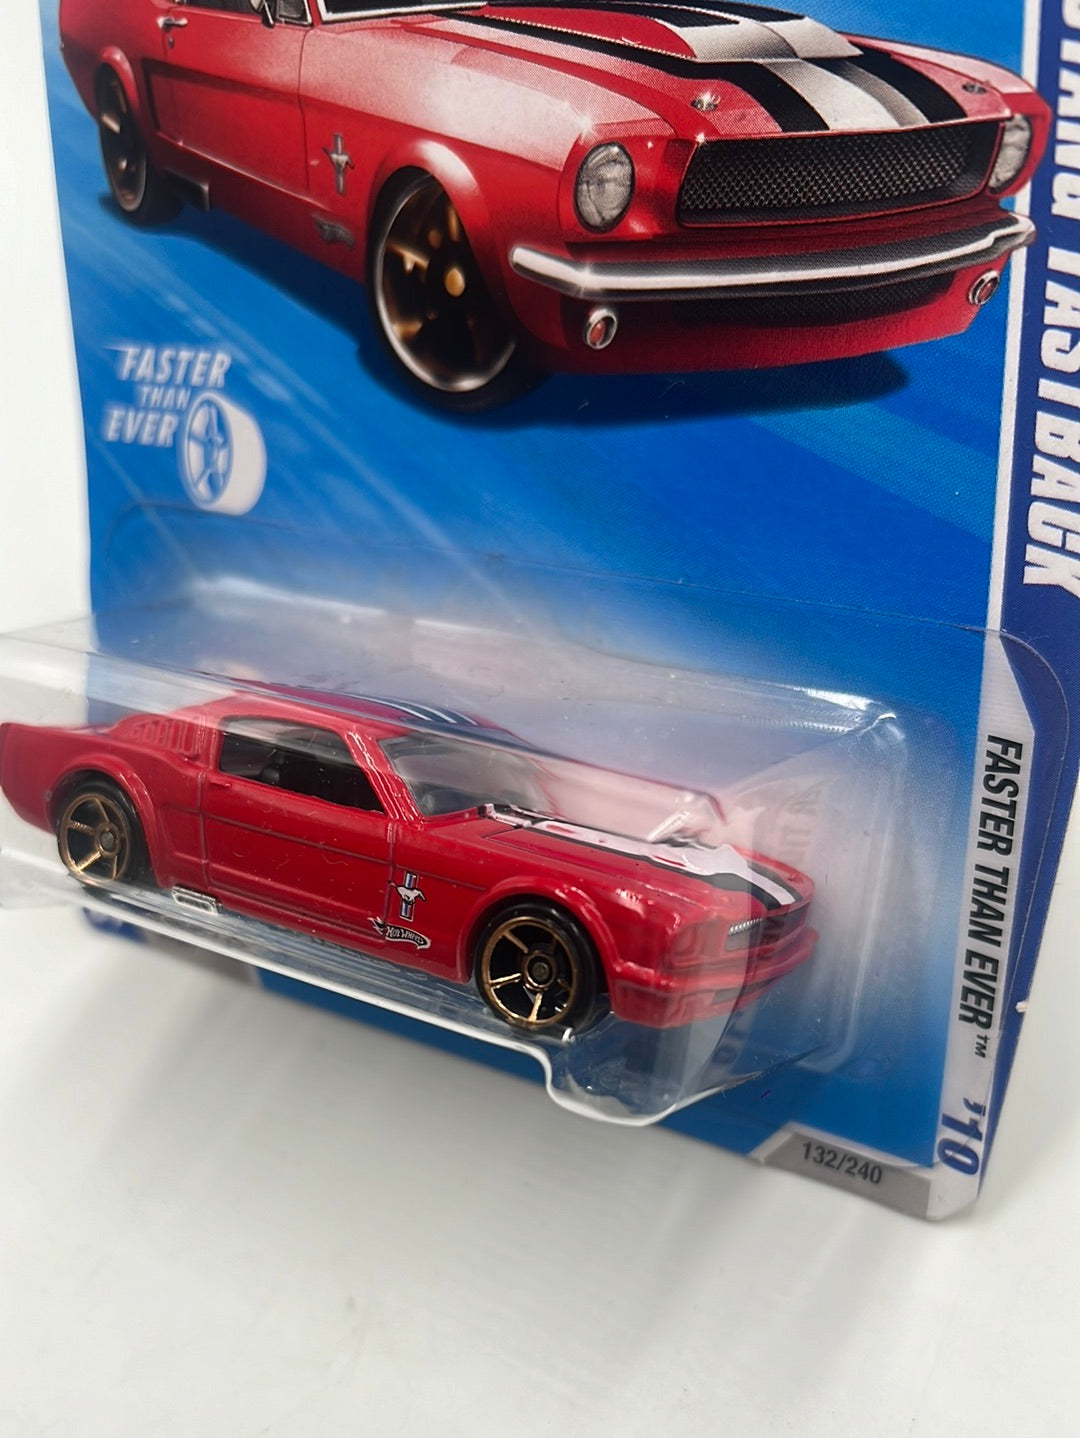 2010 Hot Wheels Faster Than Ever Ford Mustang Fastback Red 132/240 25H